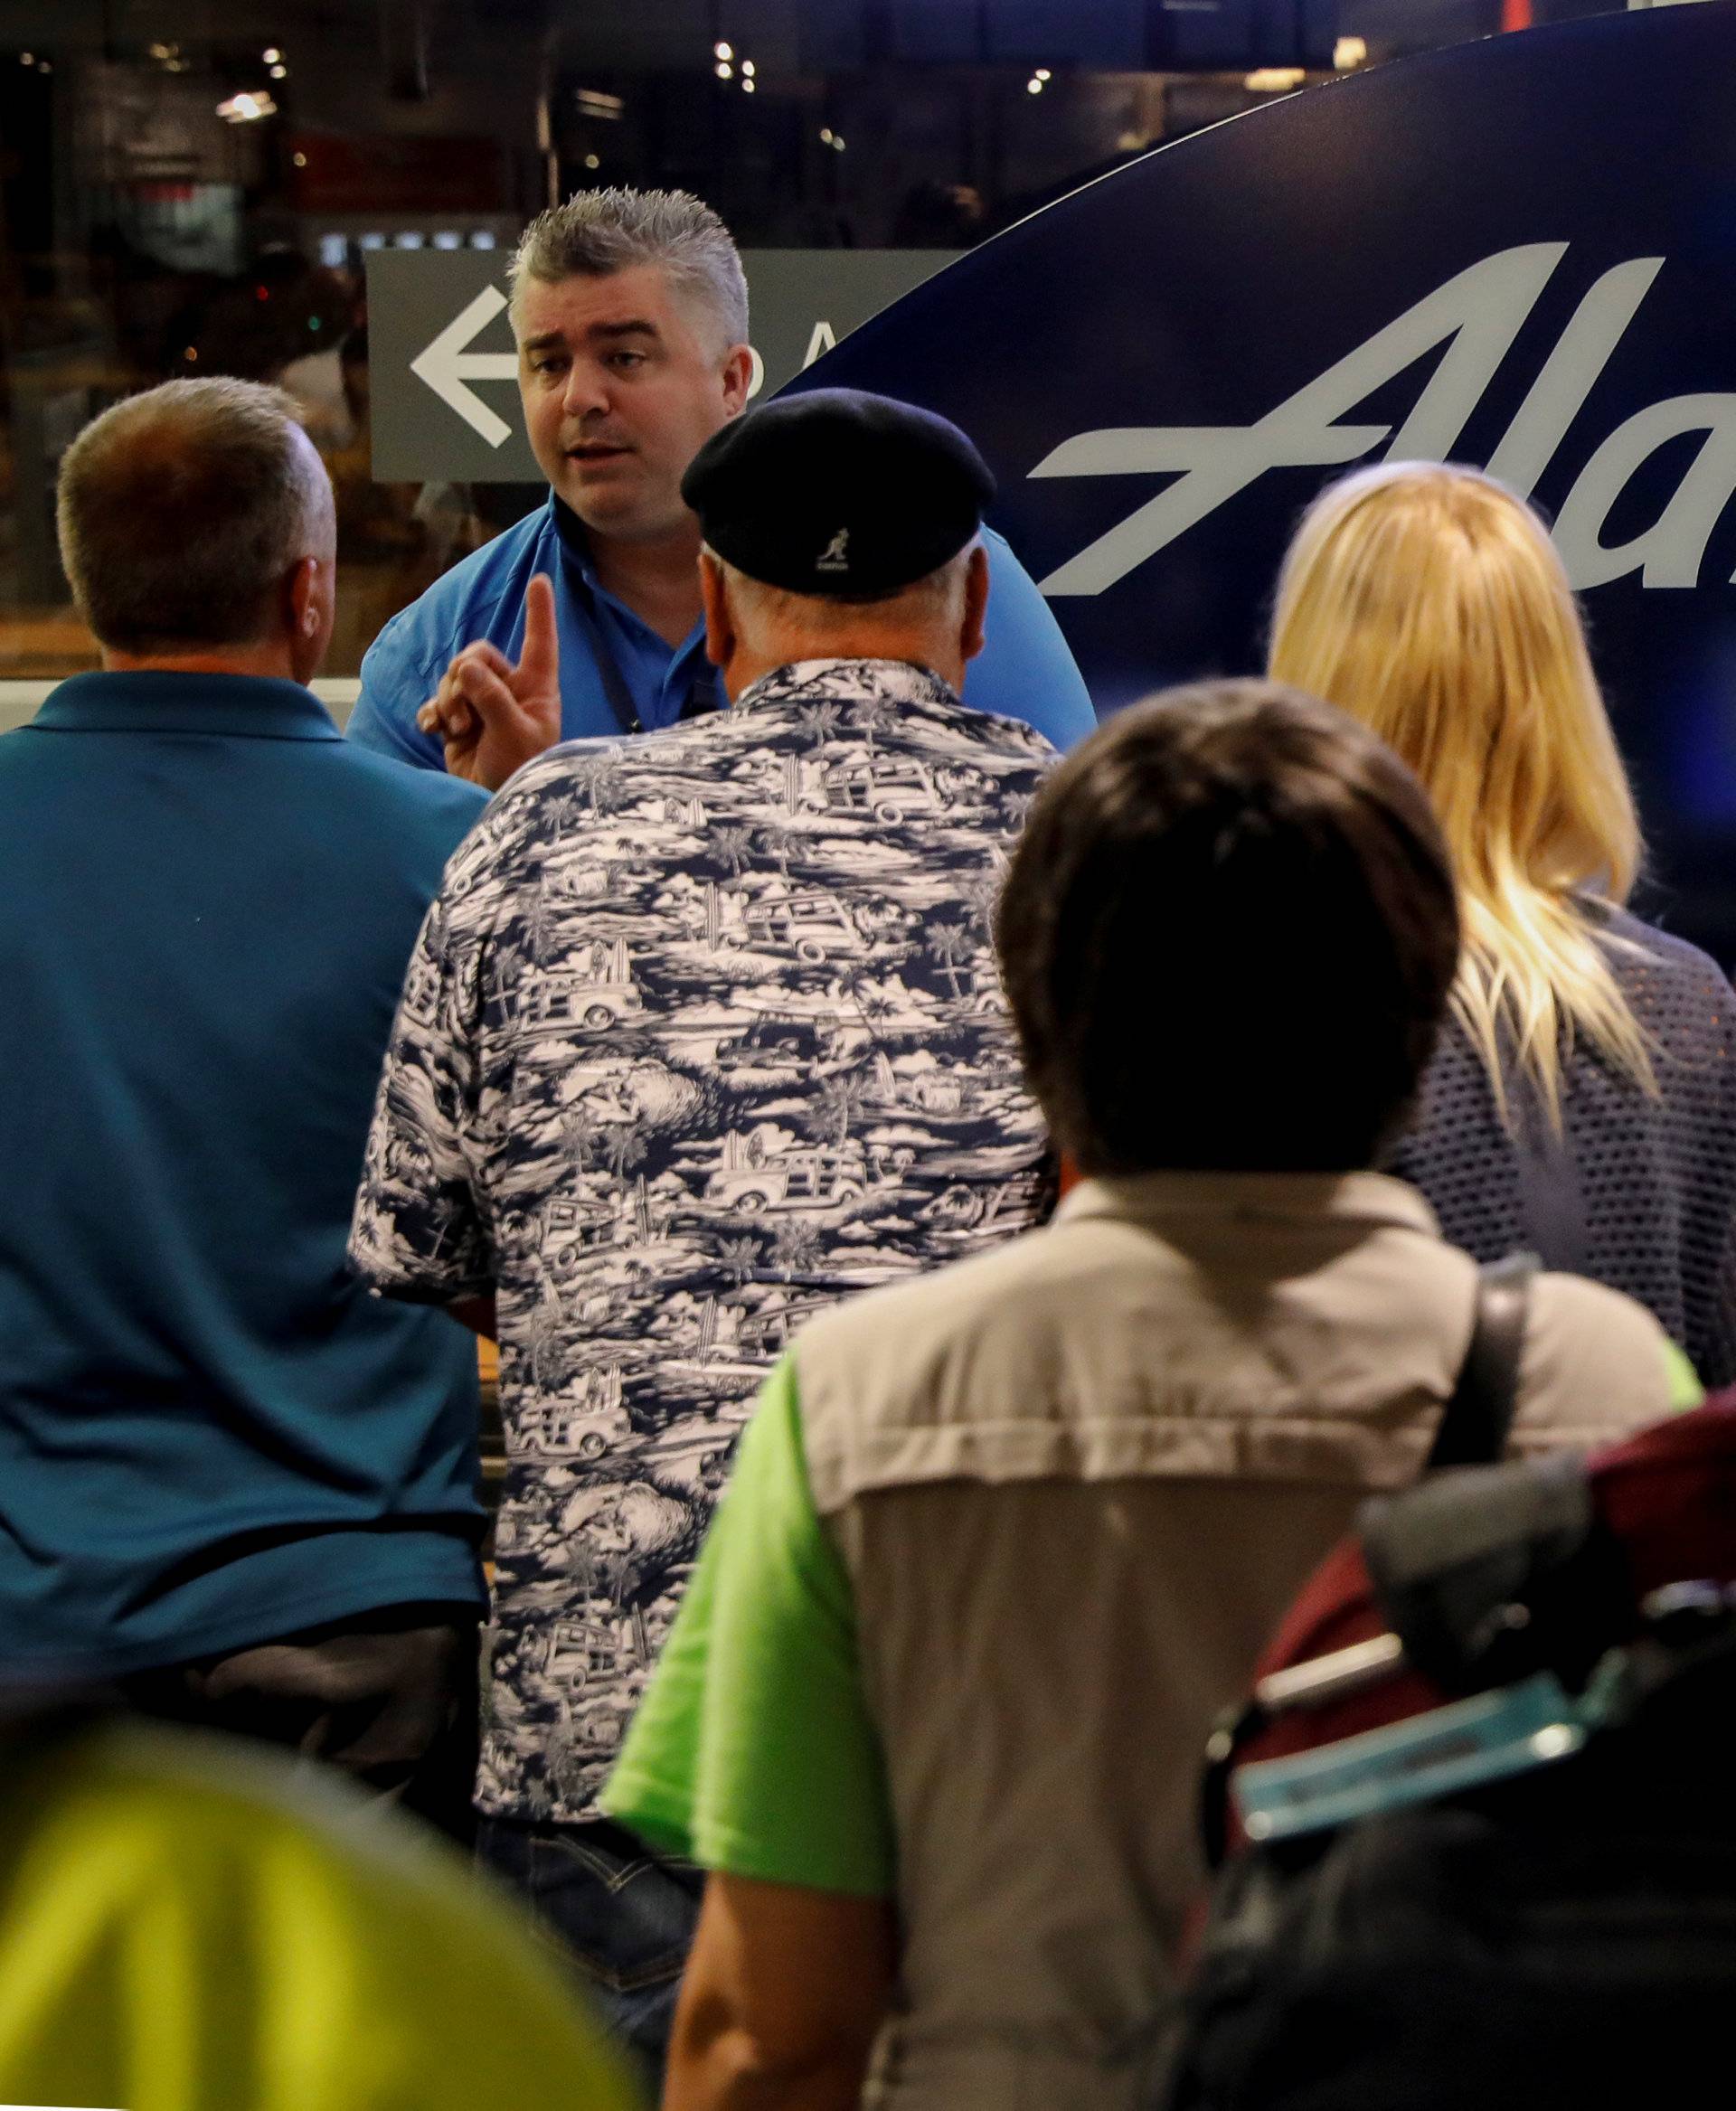 Air Alaska passengers wait in the terminal following an incident where an airline employee took off in an airplane, at Seattle-Tacoma International Airport in Seattle, Washington